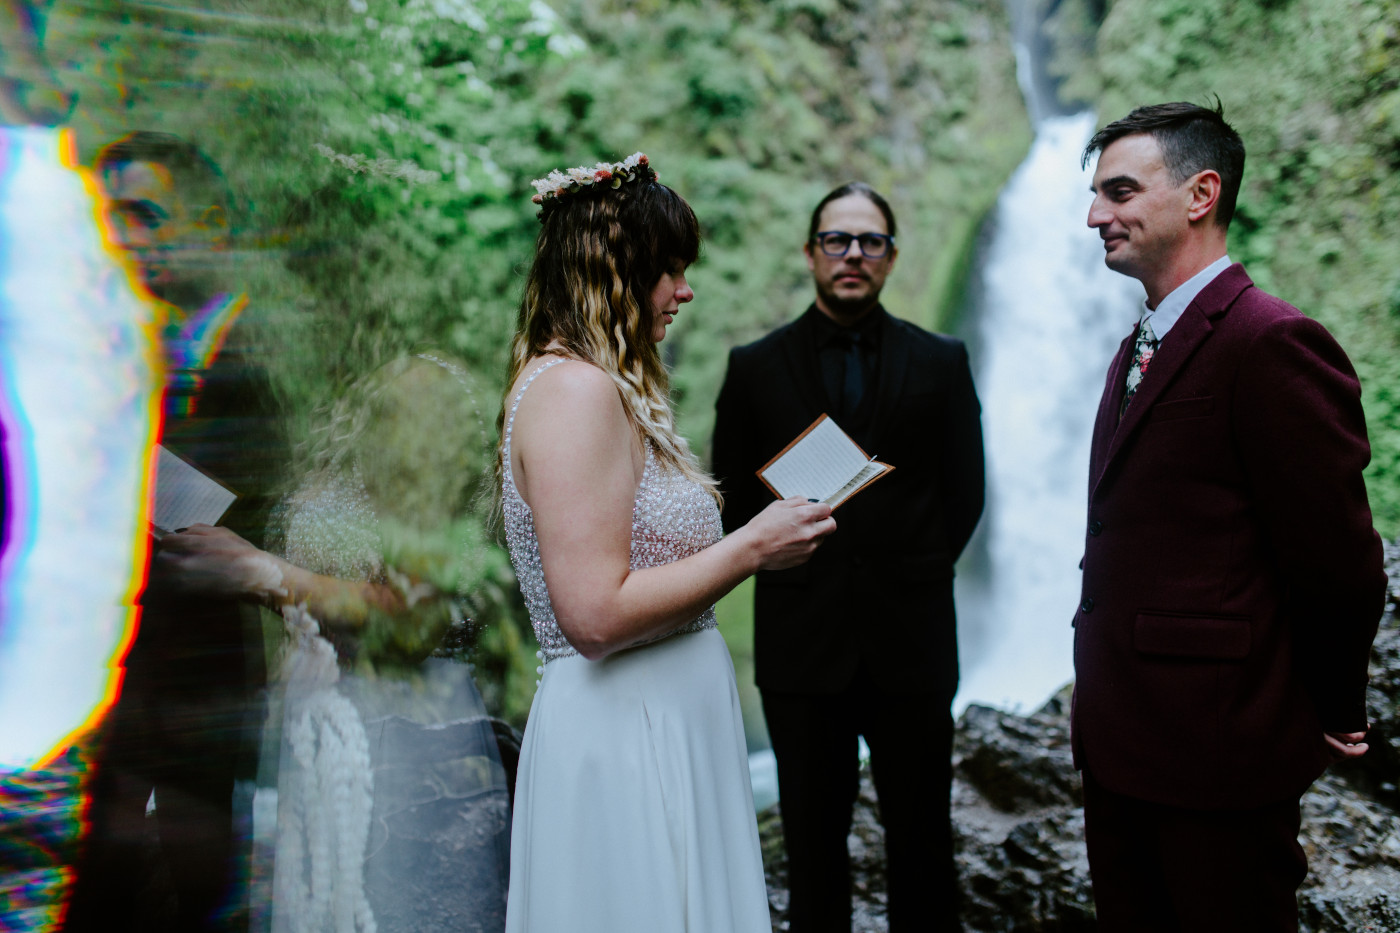 Jordan reading her vows to Andrew in front of Wahcella Falls for their elopement ceremony.